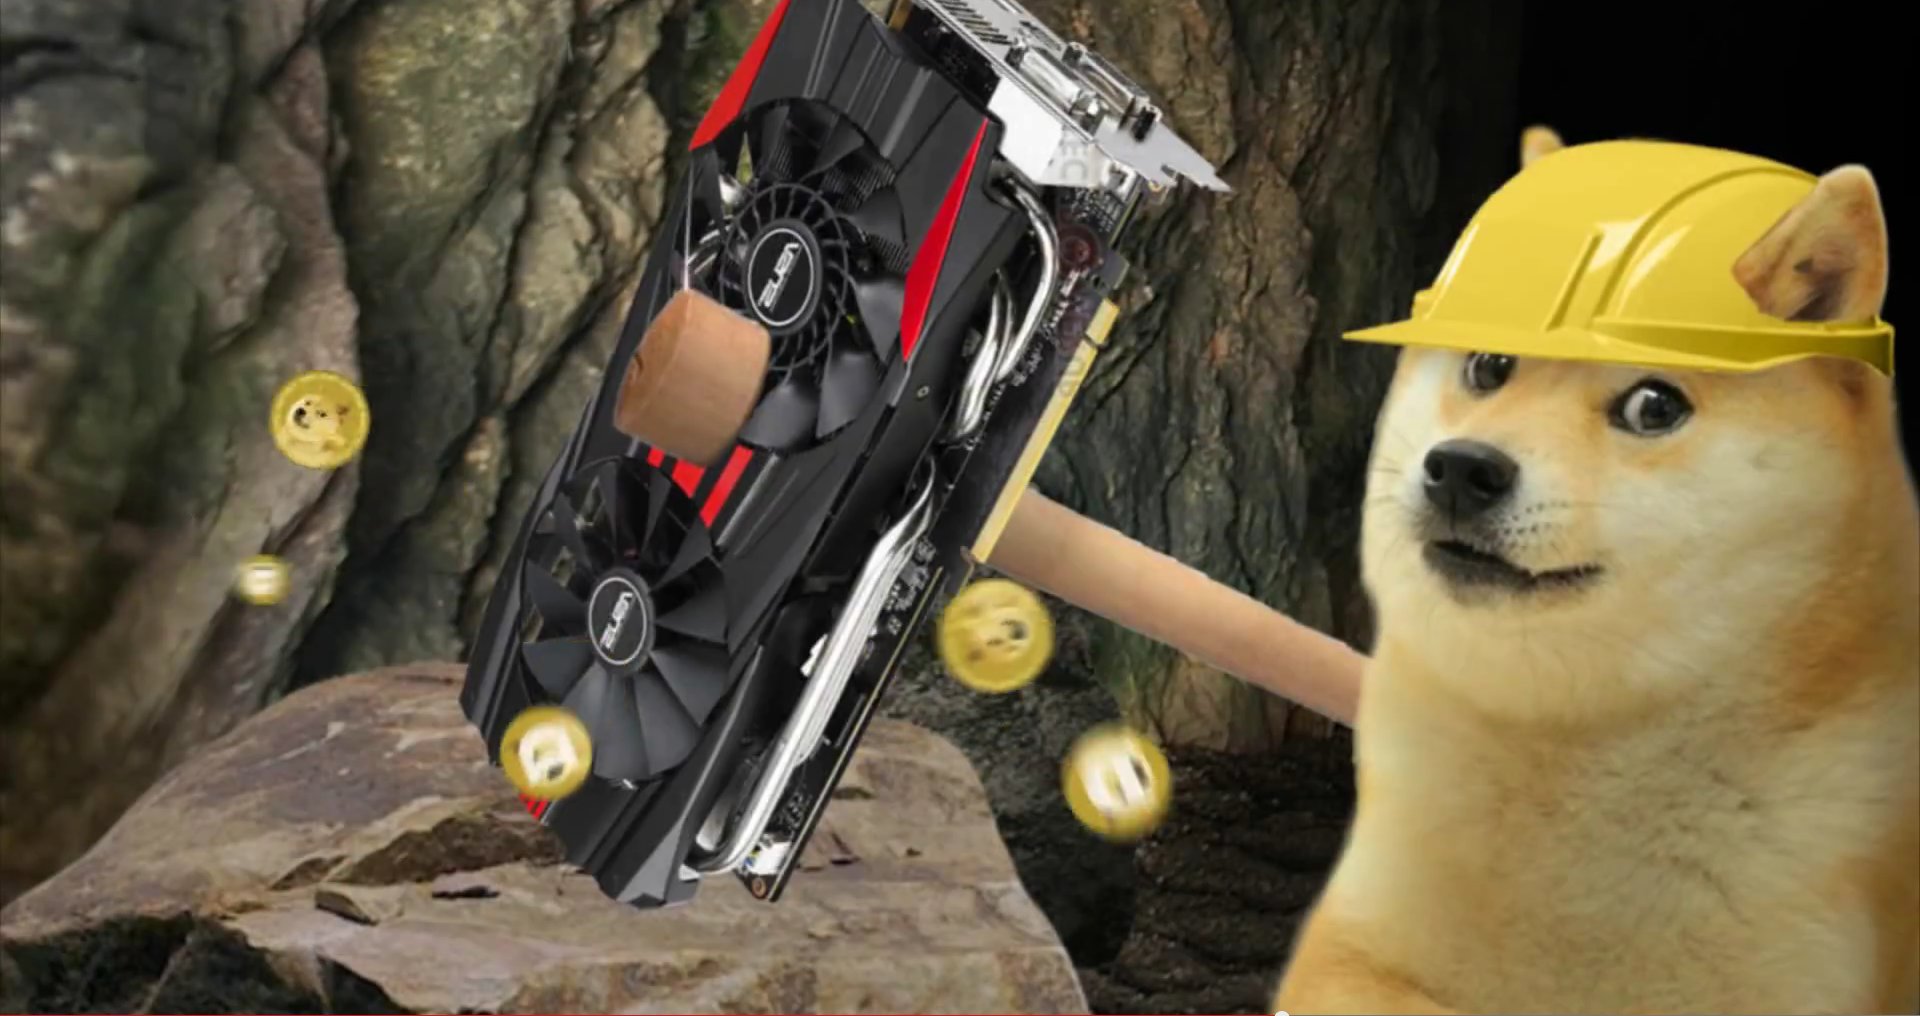 How to Mine Dogecoin - a Beginner's Guide